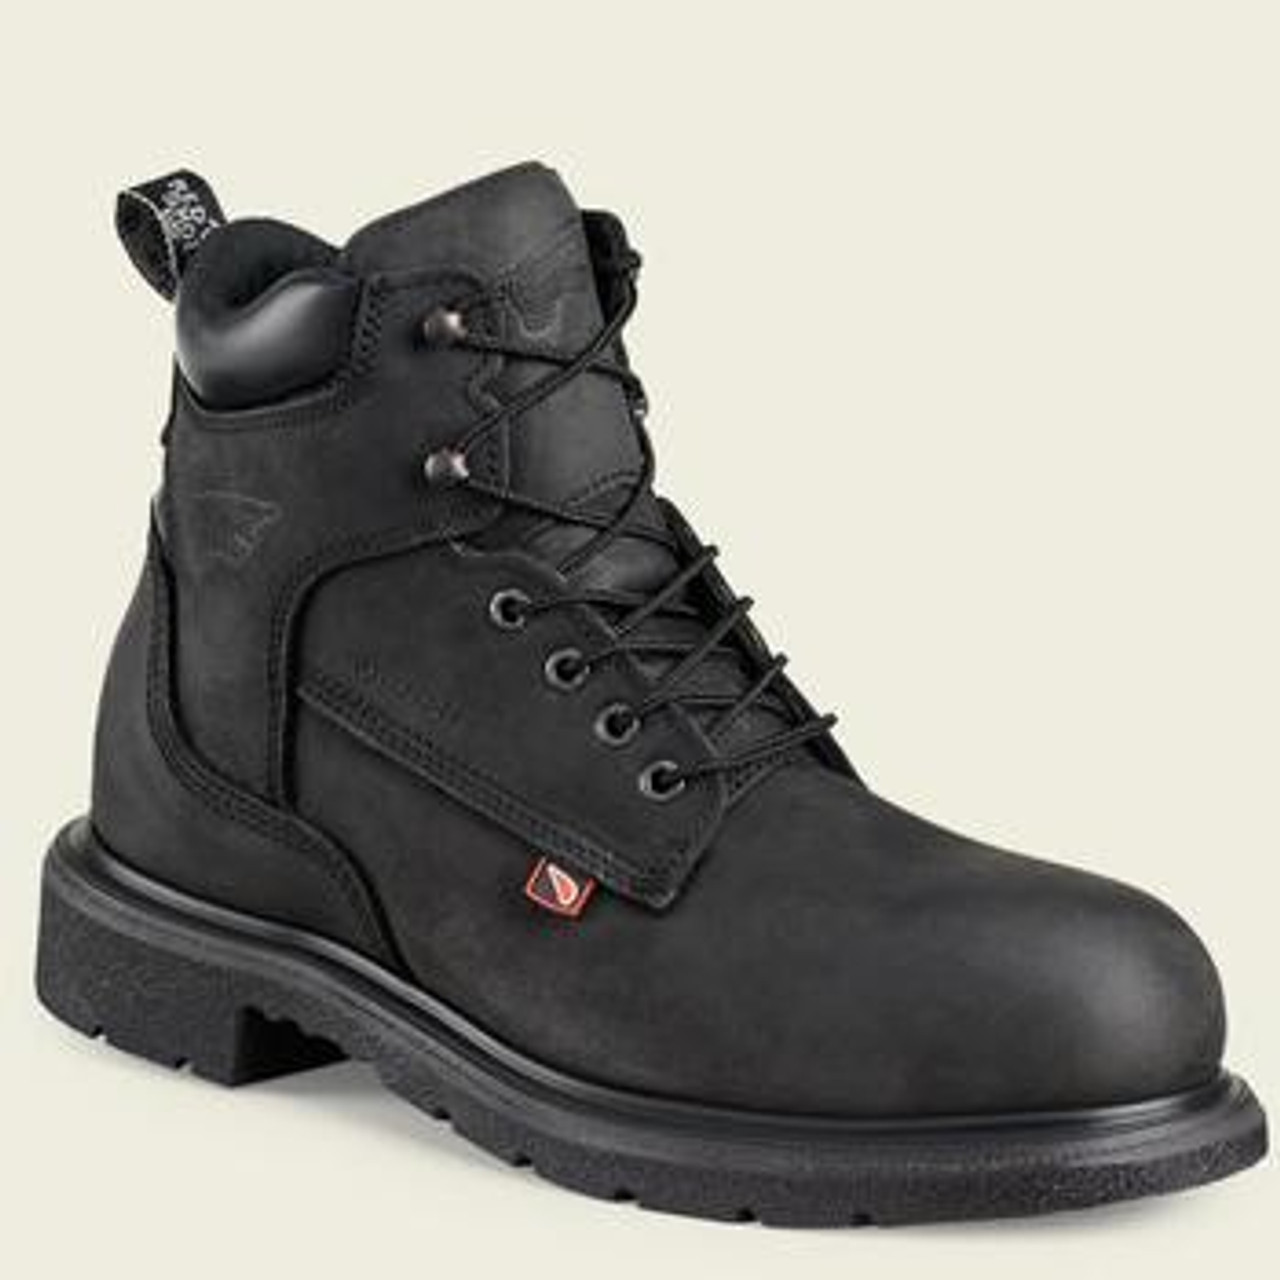 Red Wing 6” Safety Toe Boot Black